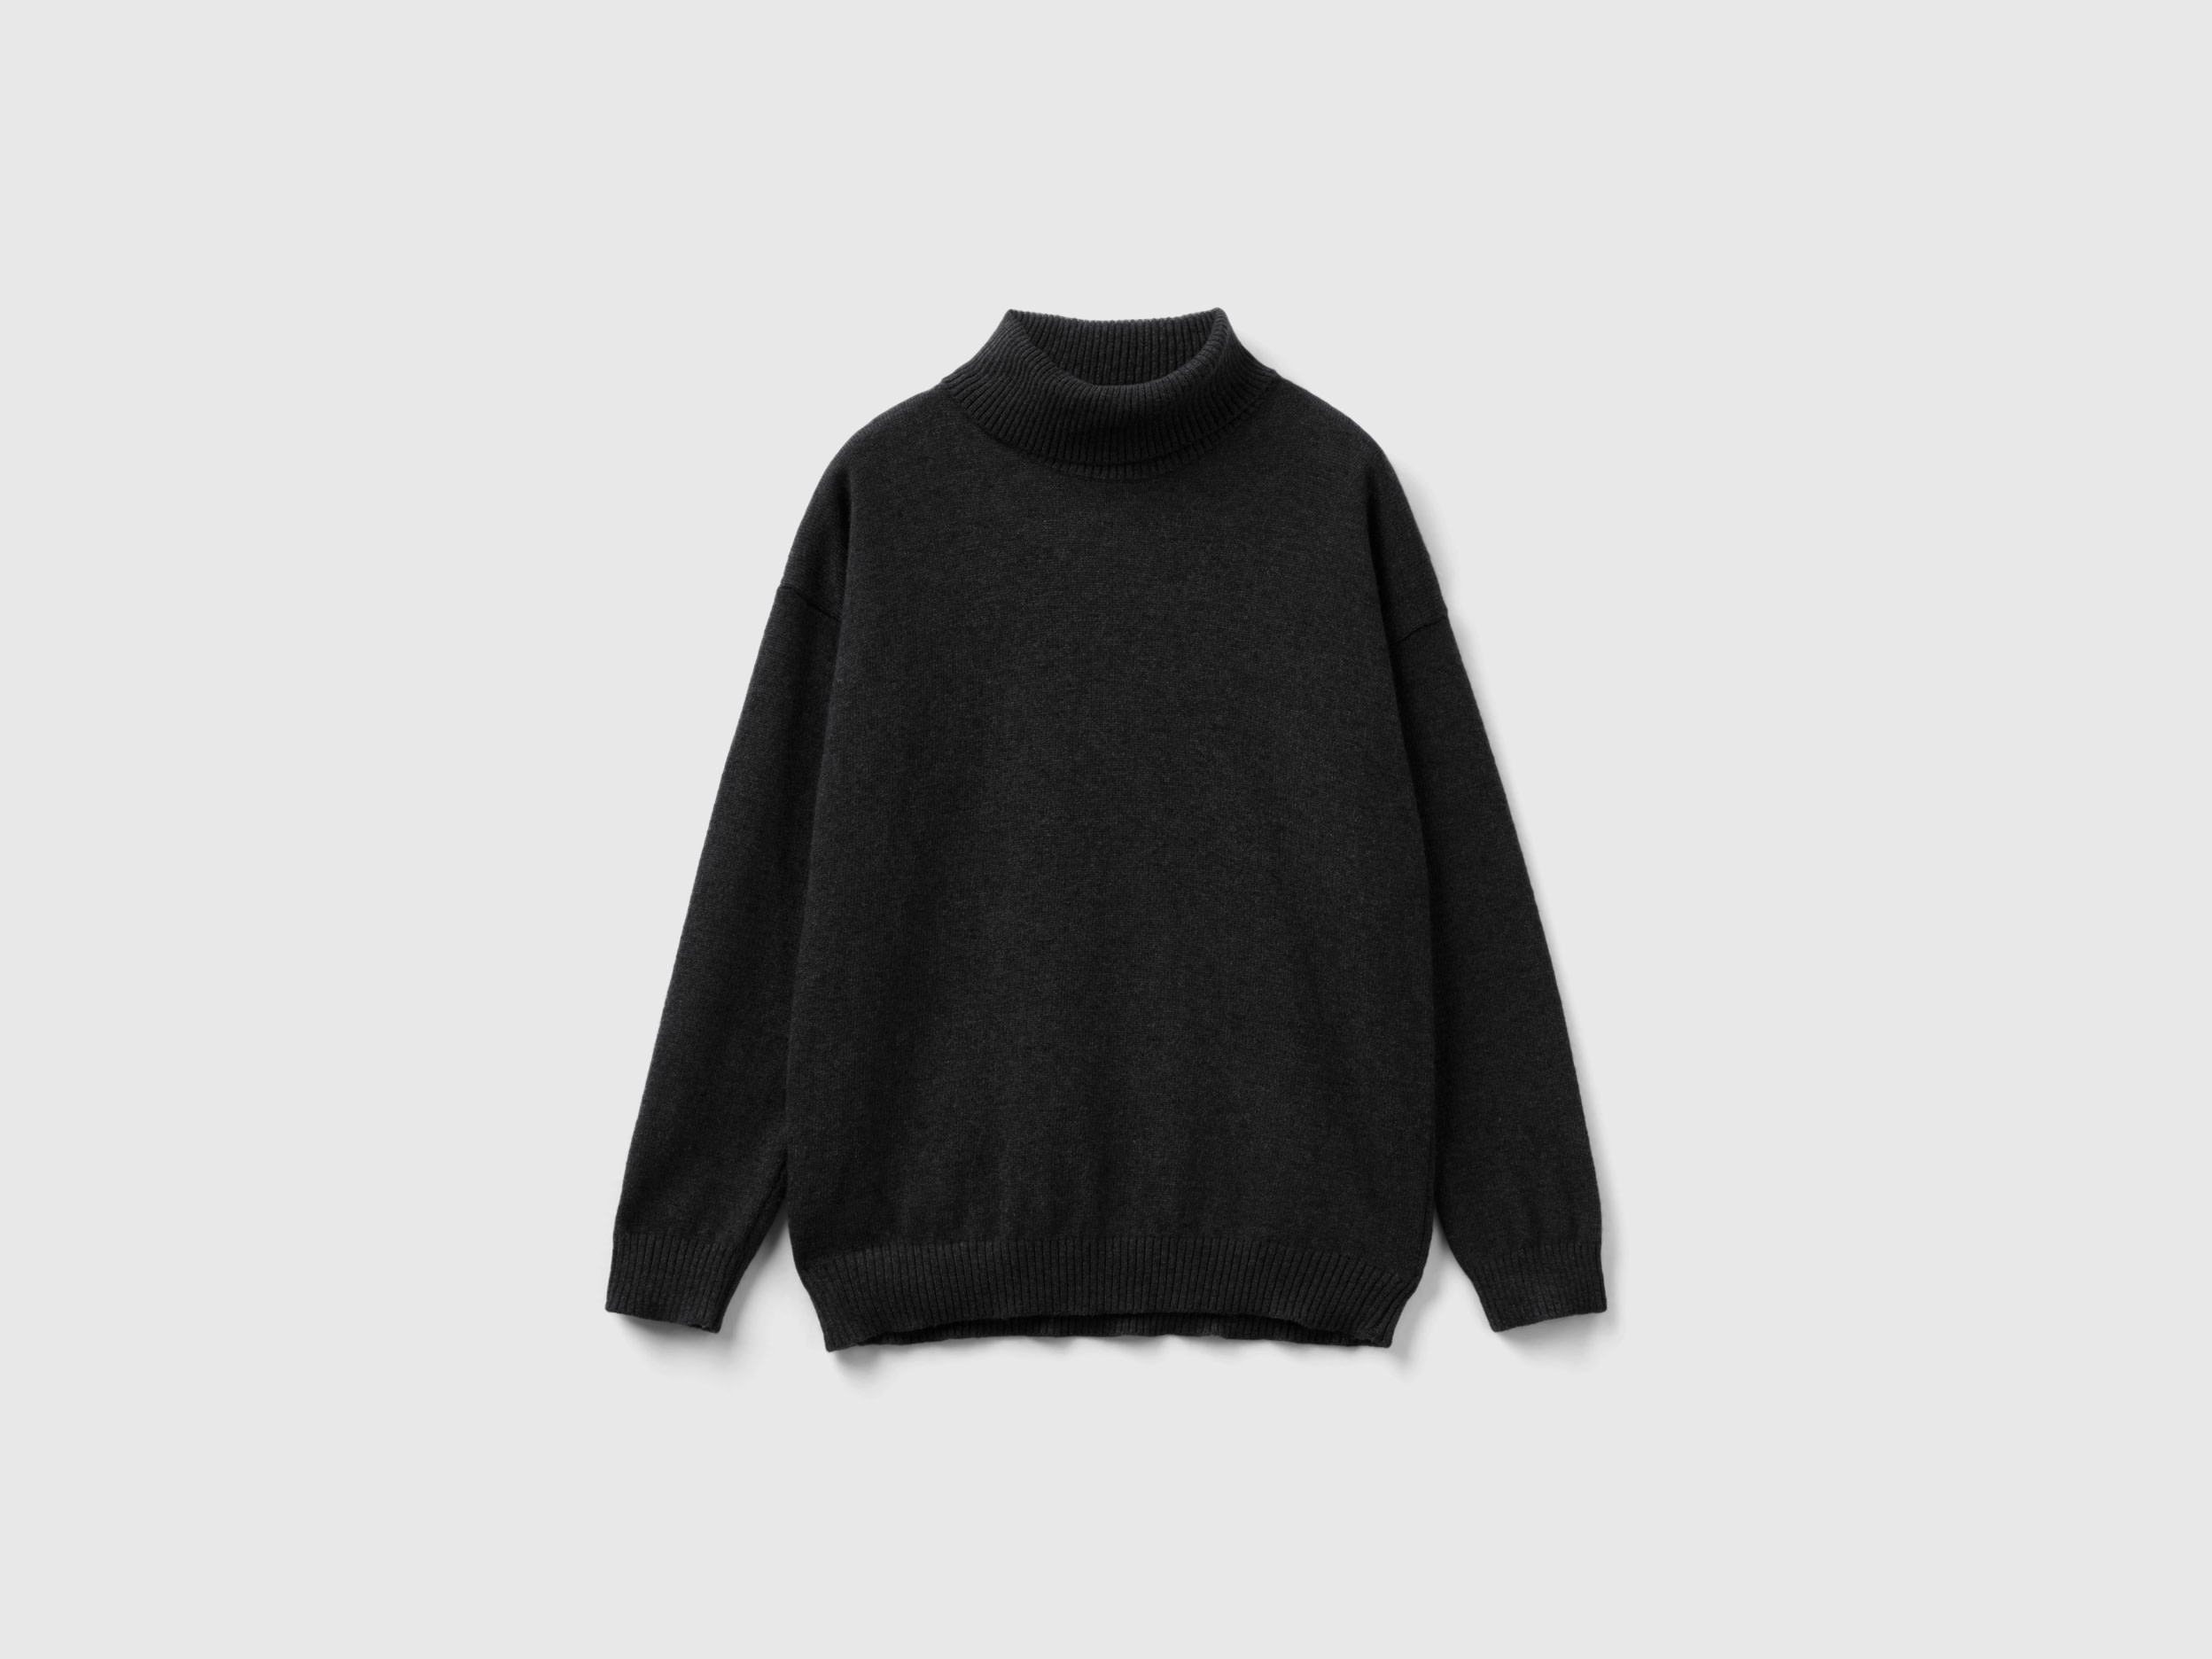 Benetton, Turtleneck Sweater In Cashmere And Wool Blend, size 2XL, Black, Kids